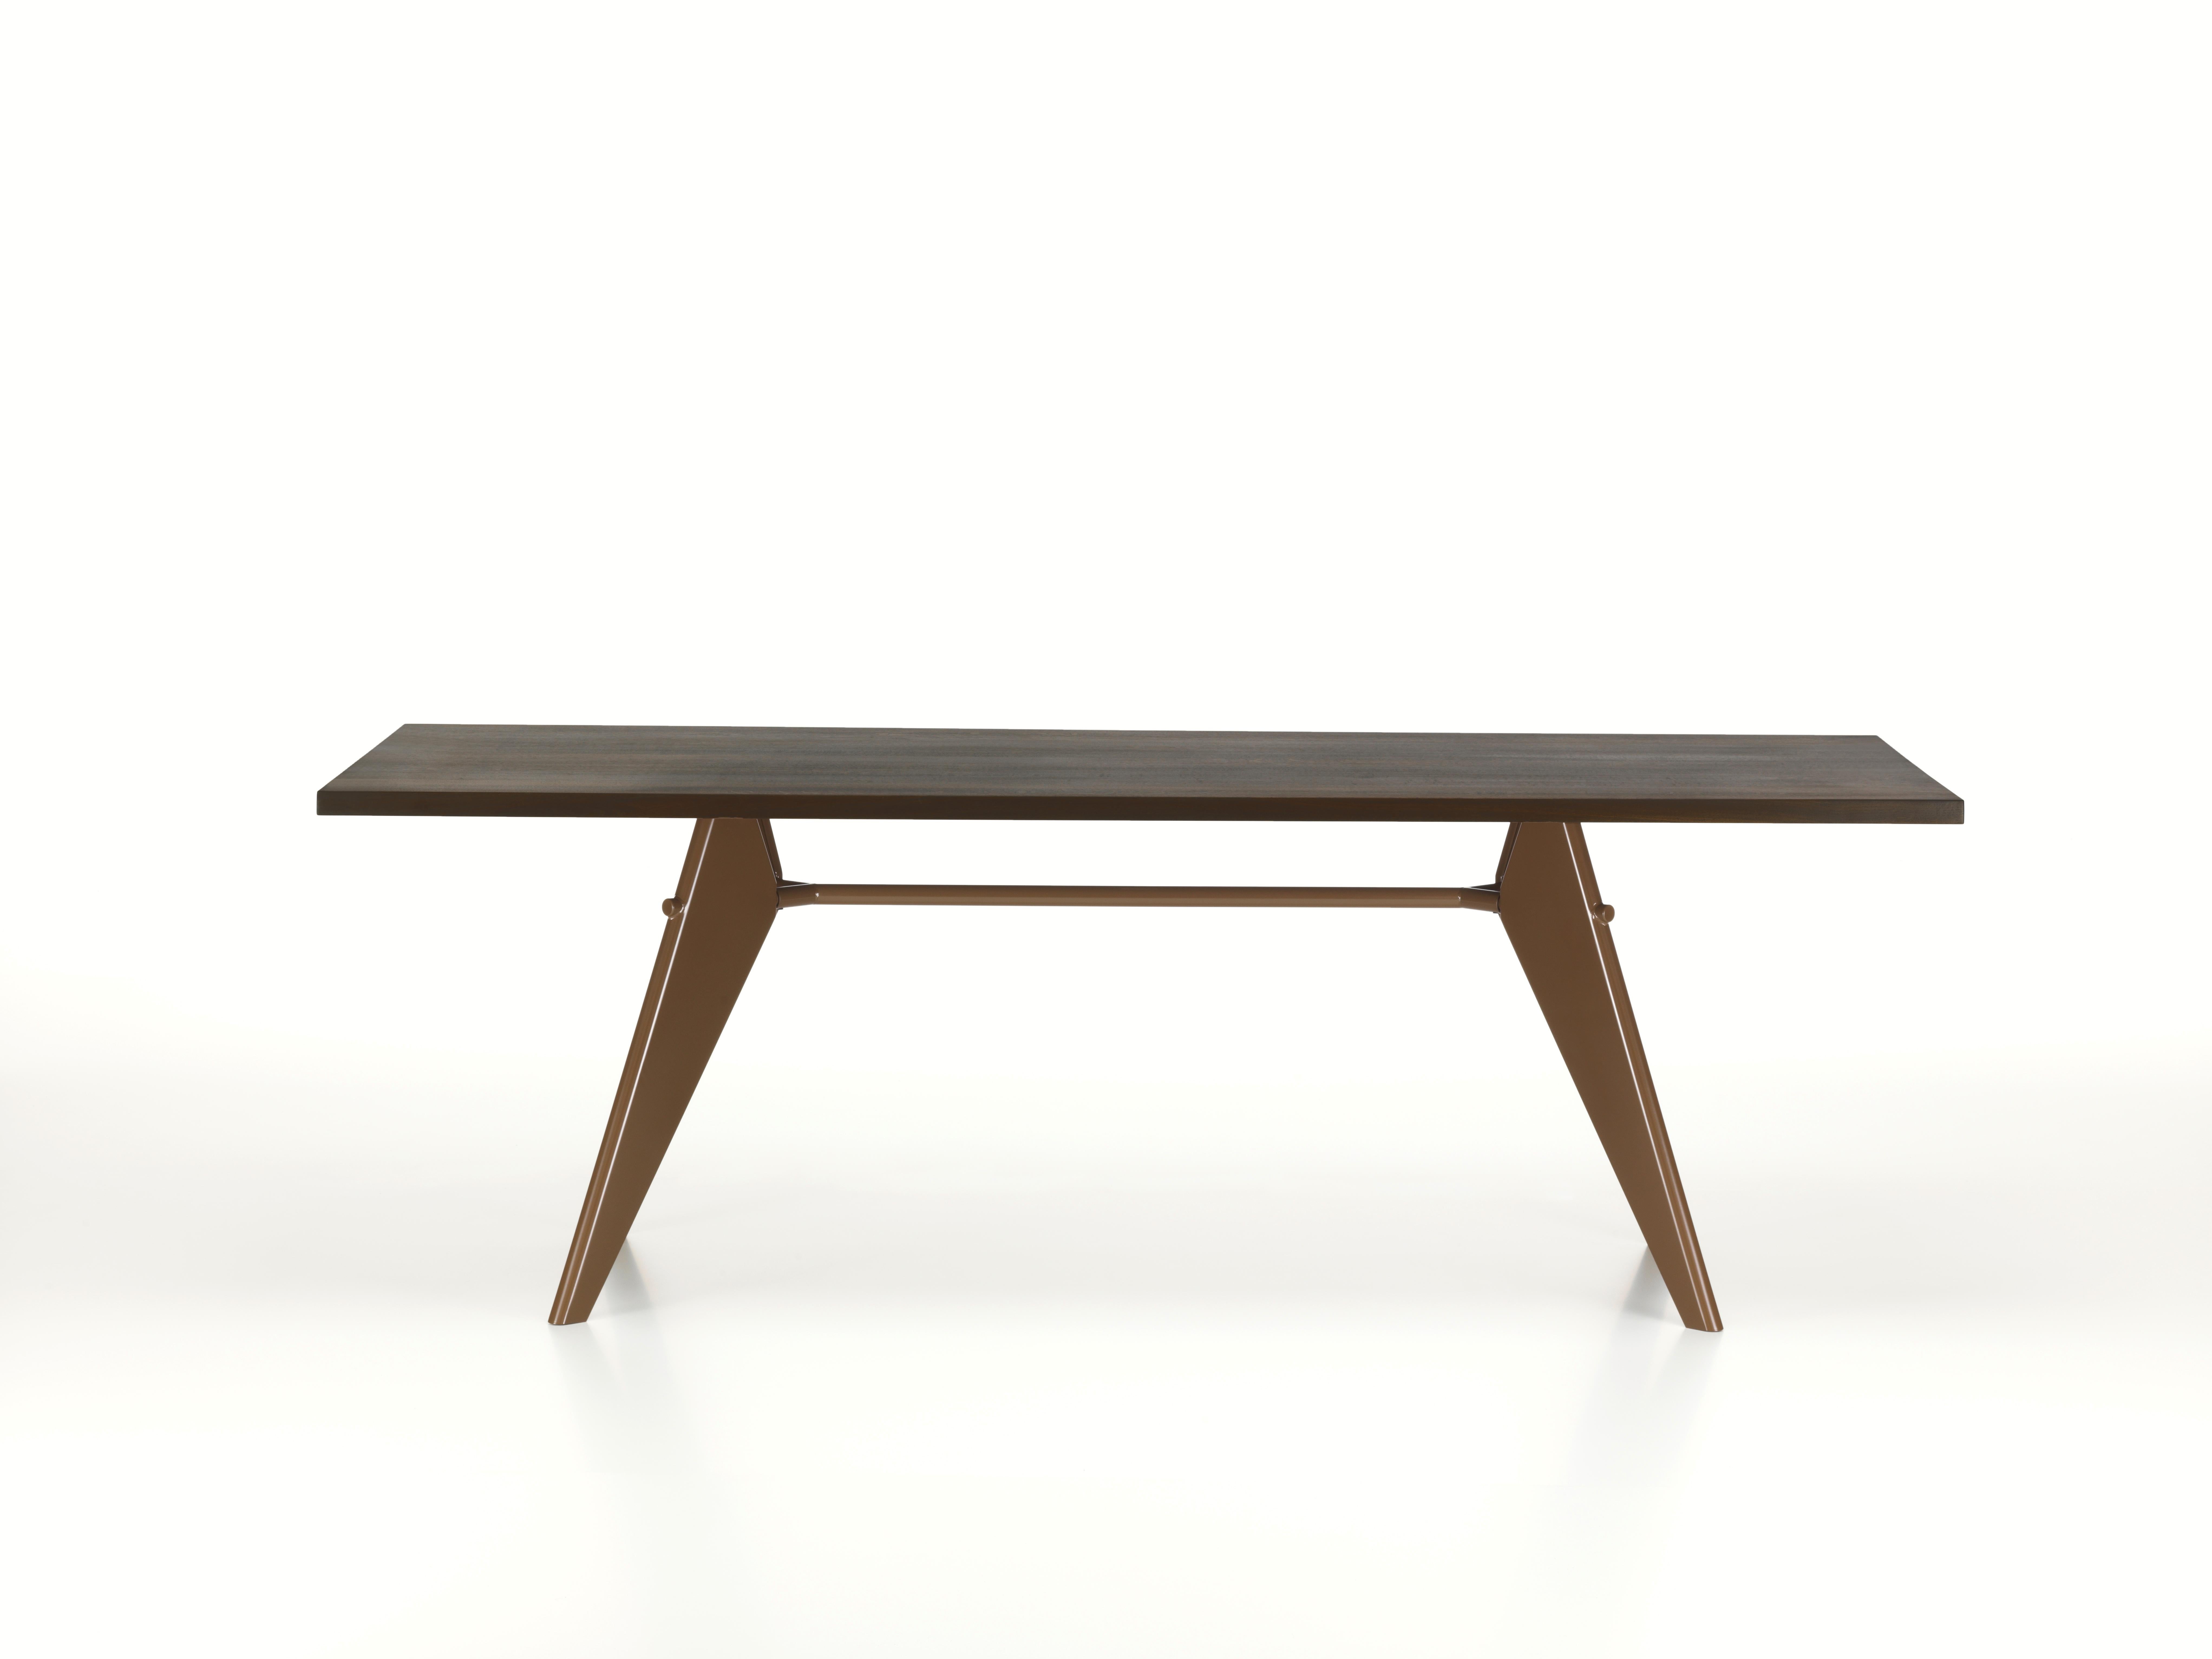 These items are currently only available in the United States.

The aesthetic appearance of Jean Prouvé's EM table adheres to structural principles, illustrating the flow of forces and stresses in its construction. It comes in a range of sizes with